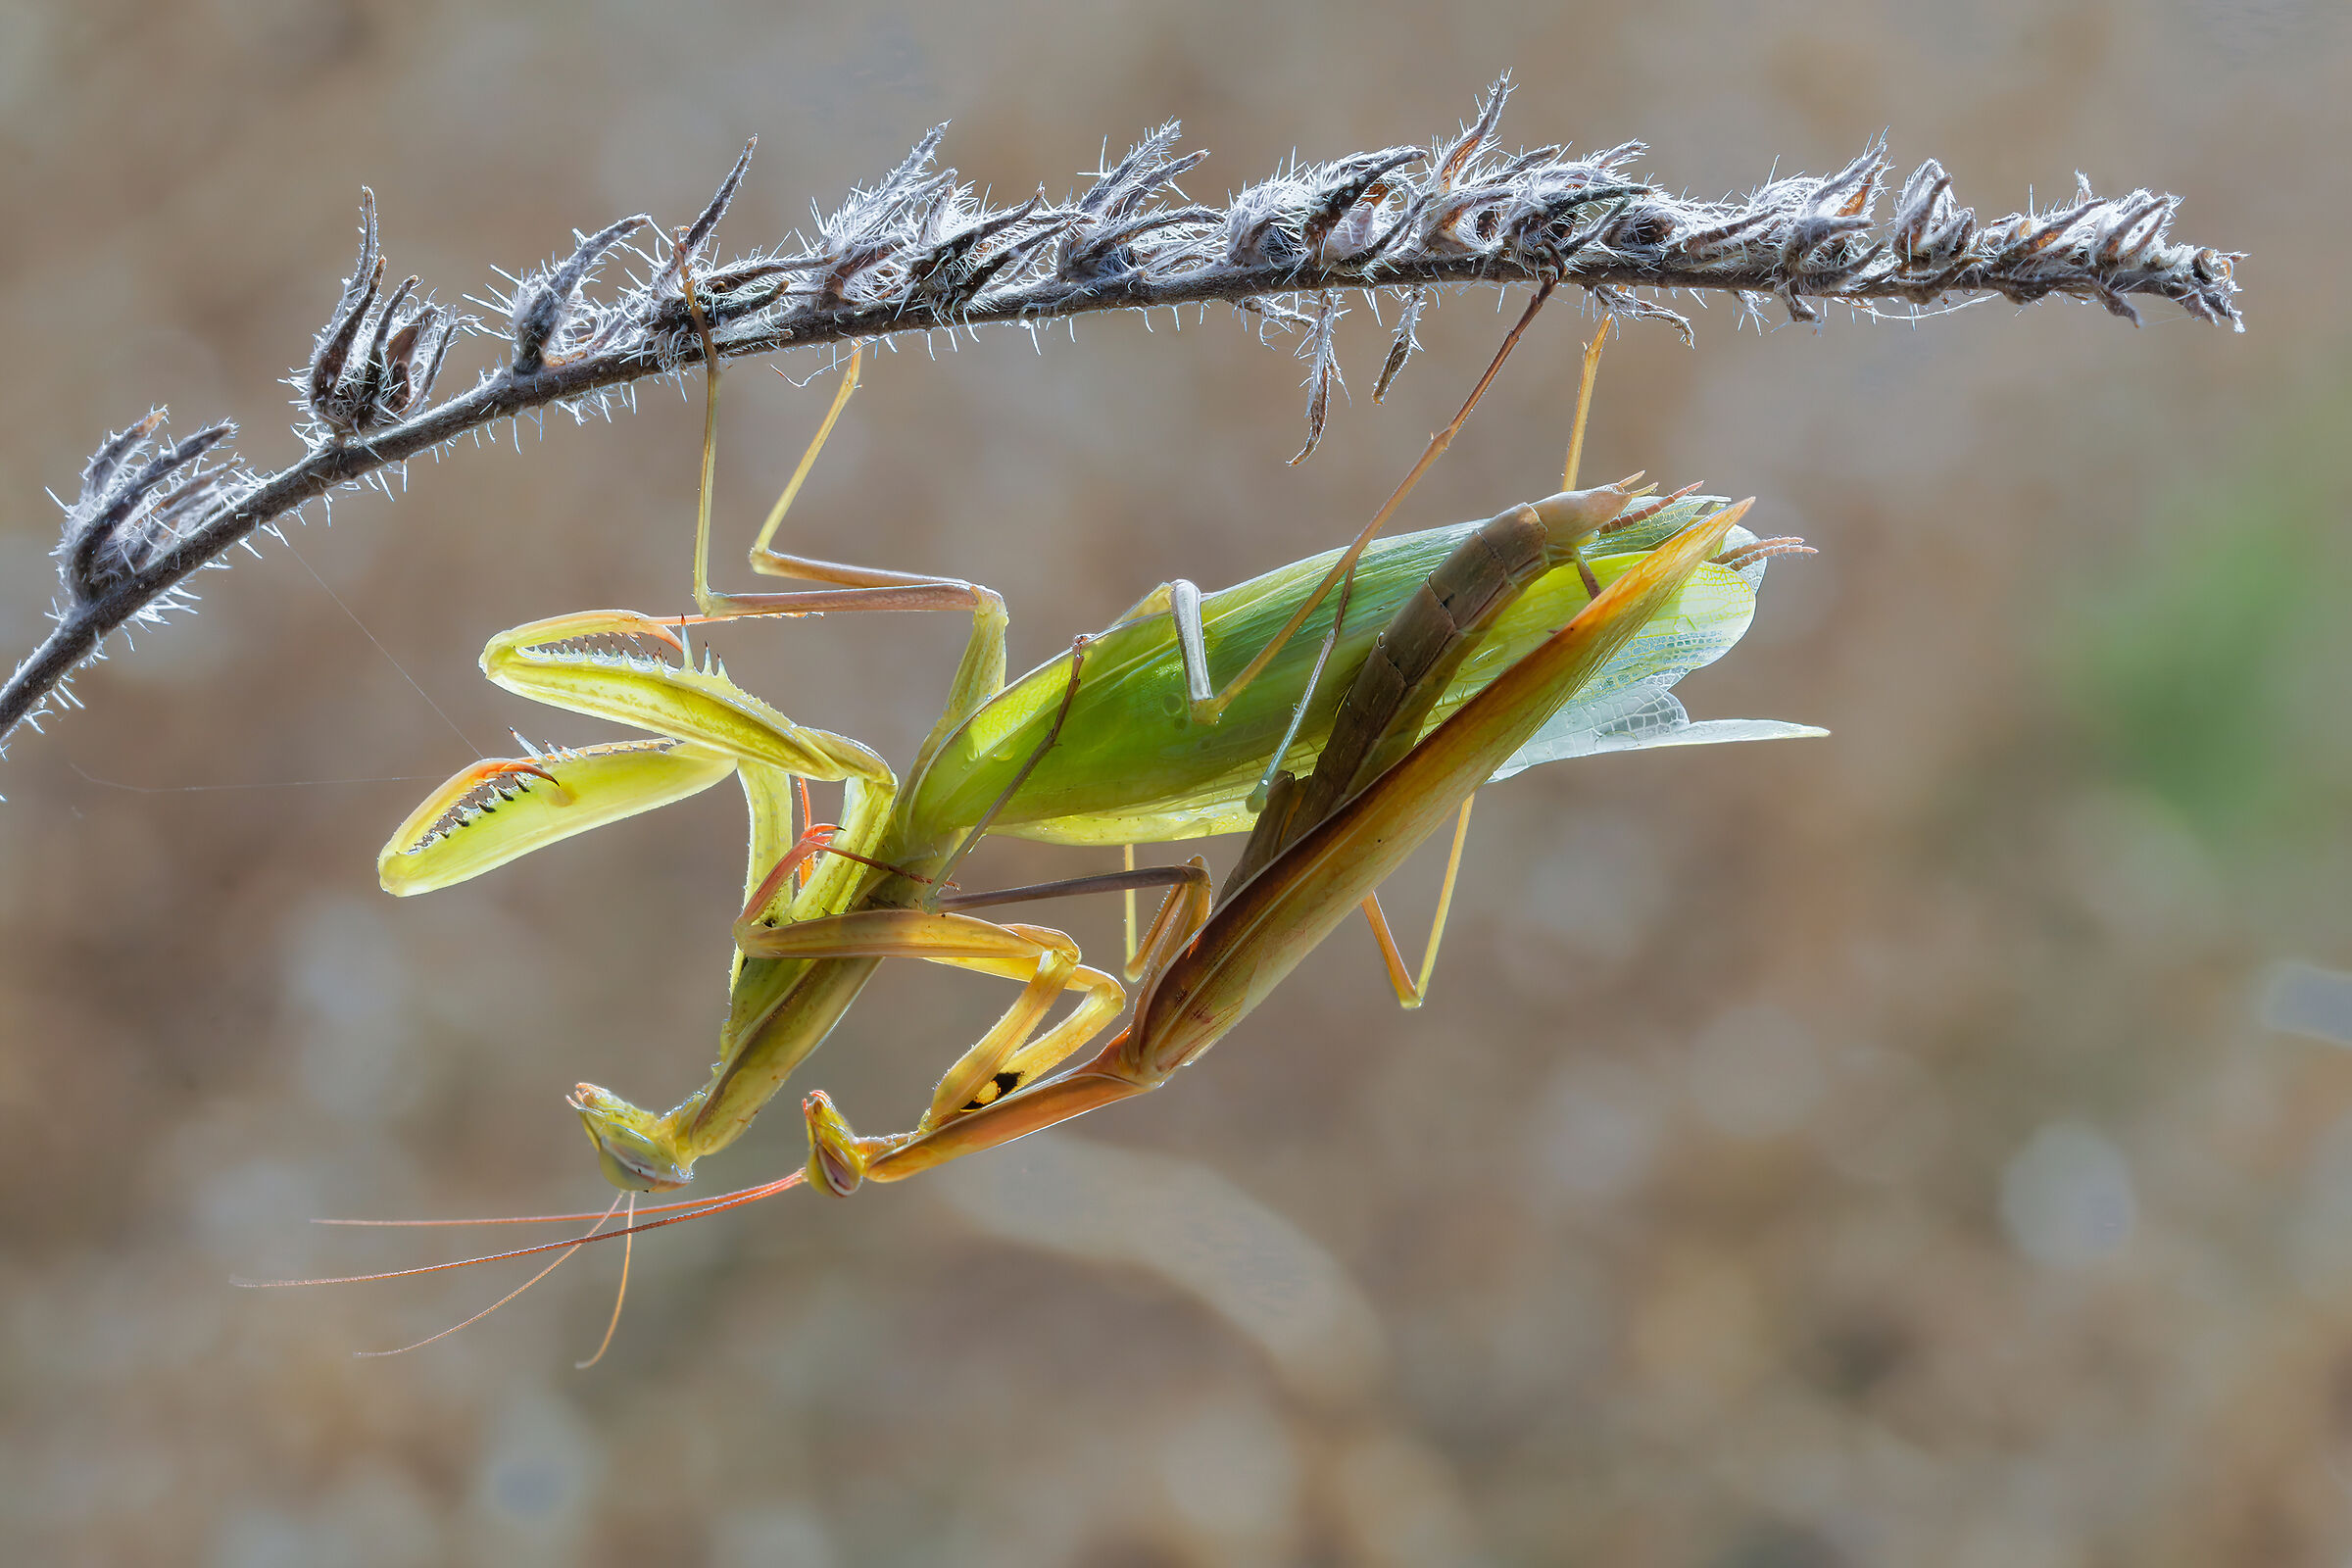 Pair of mantises in the sun...